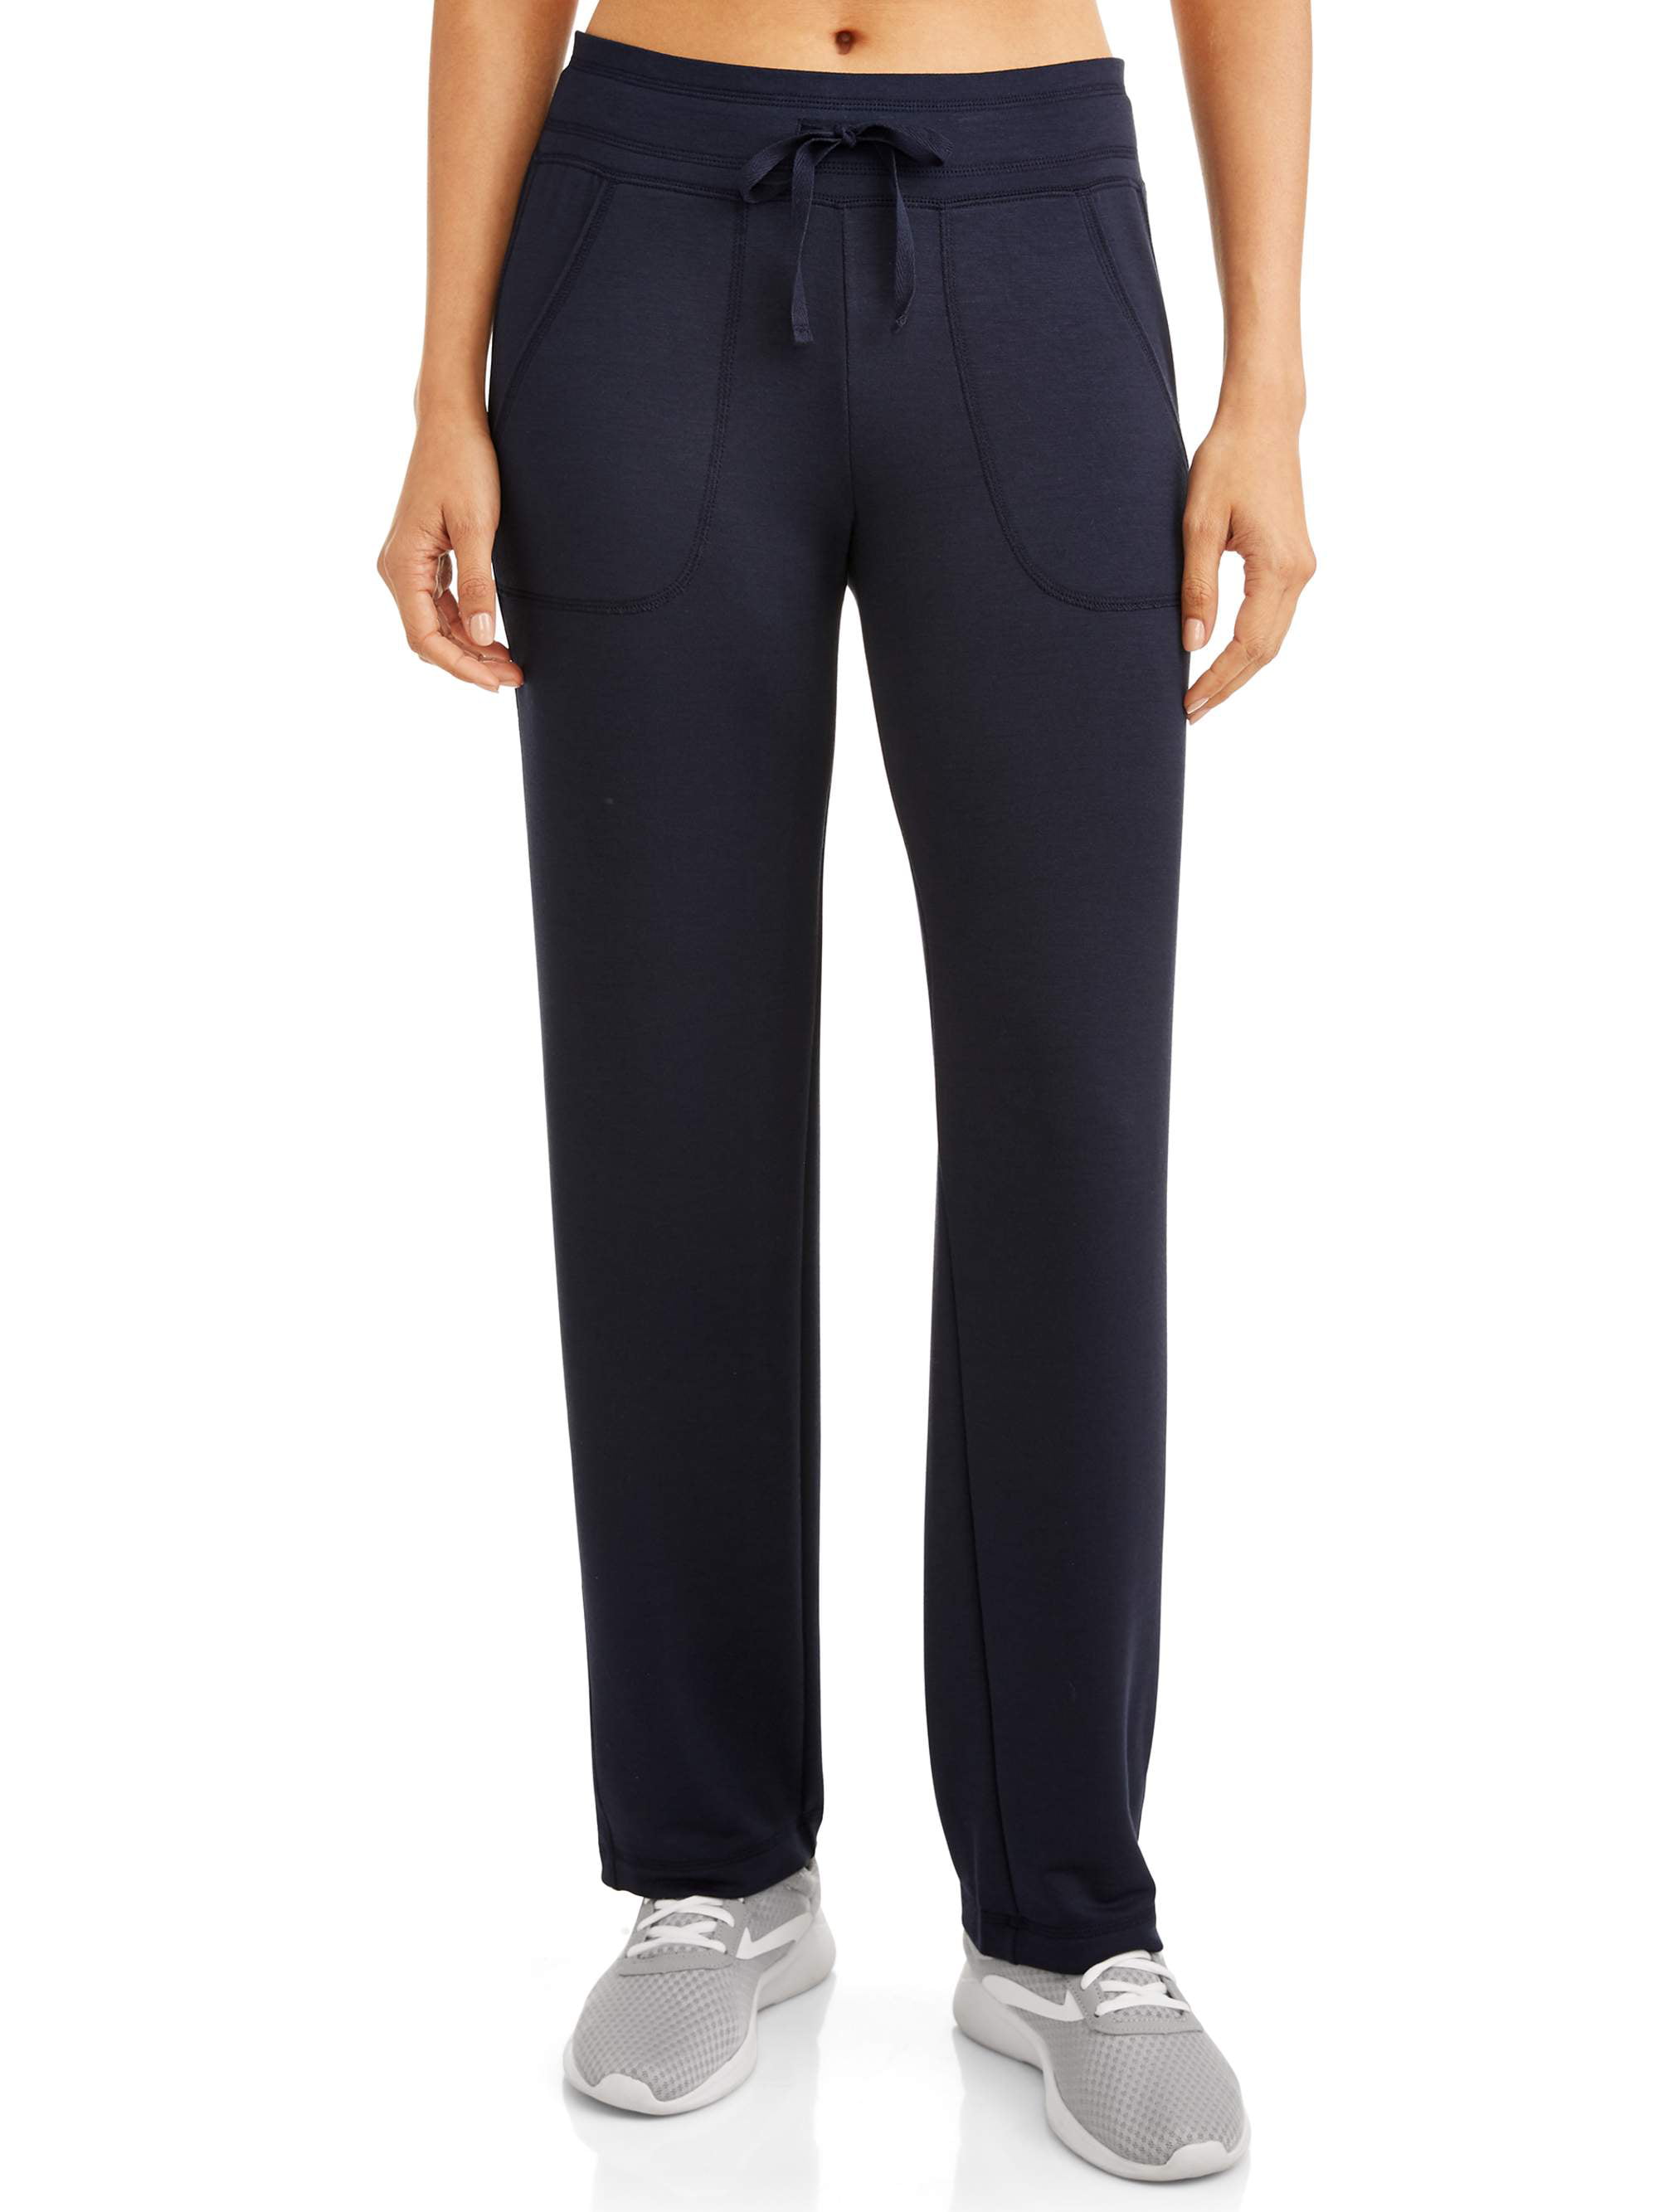 Athletic Works - Athletic Works Women's Athleisure Relaxed Pants ...